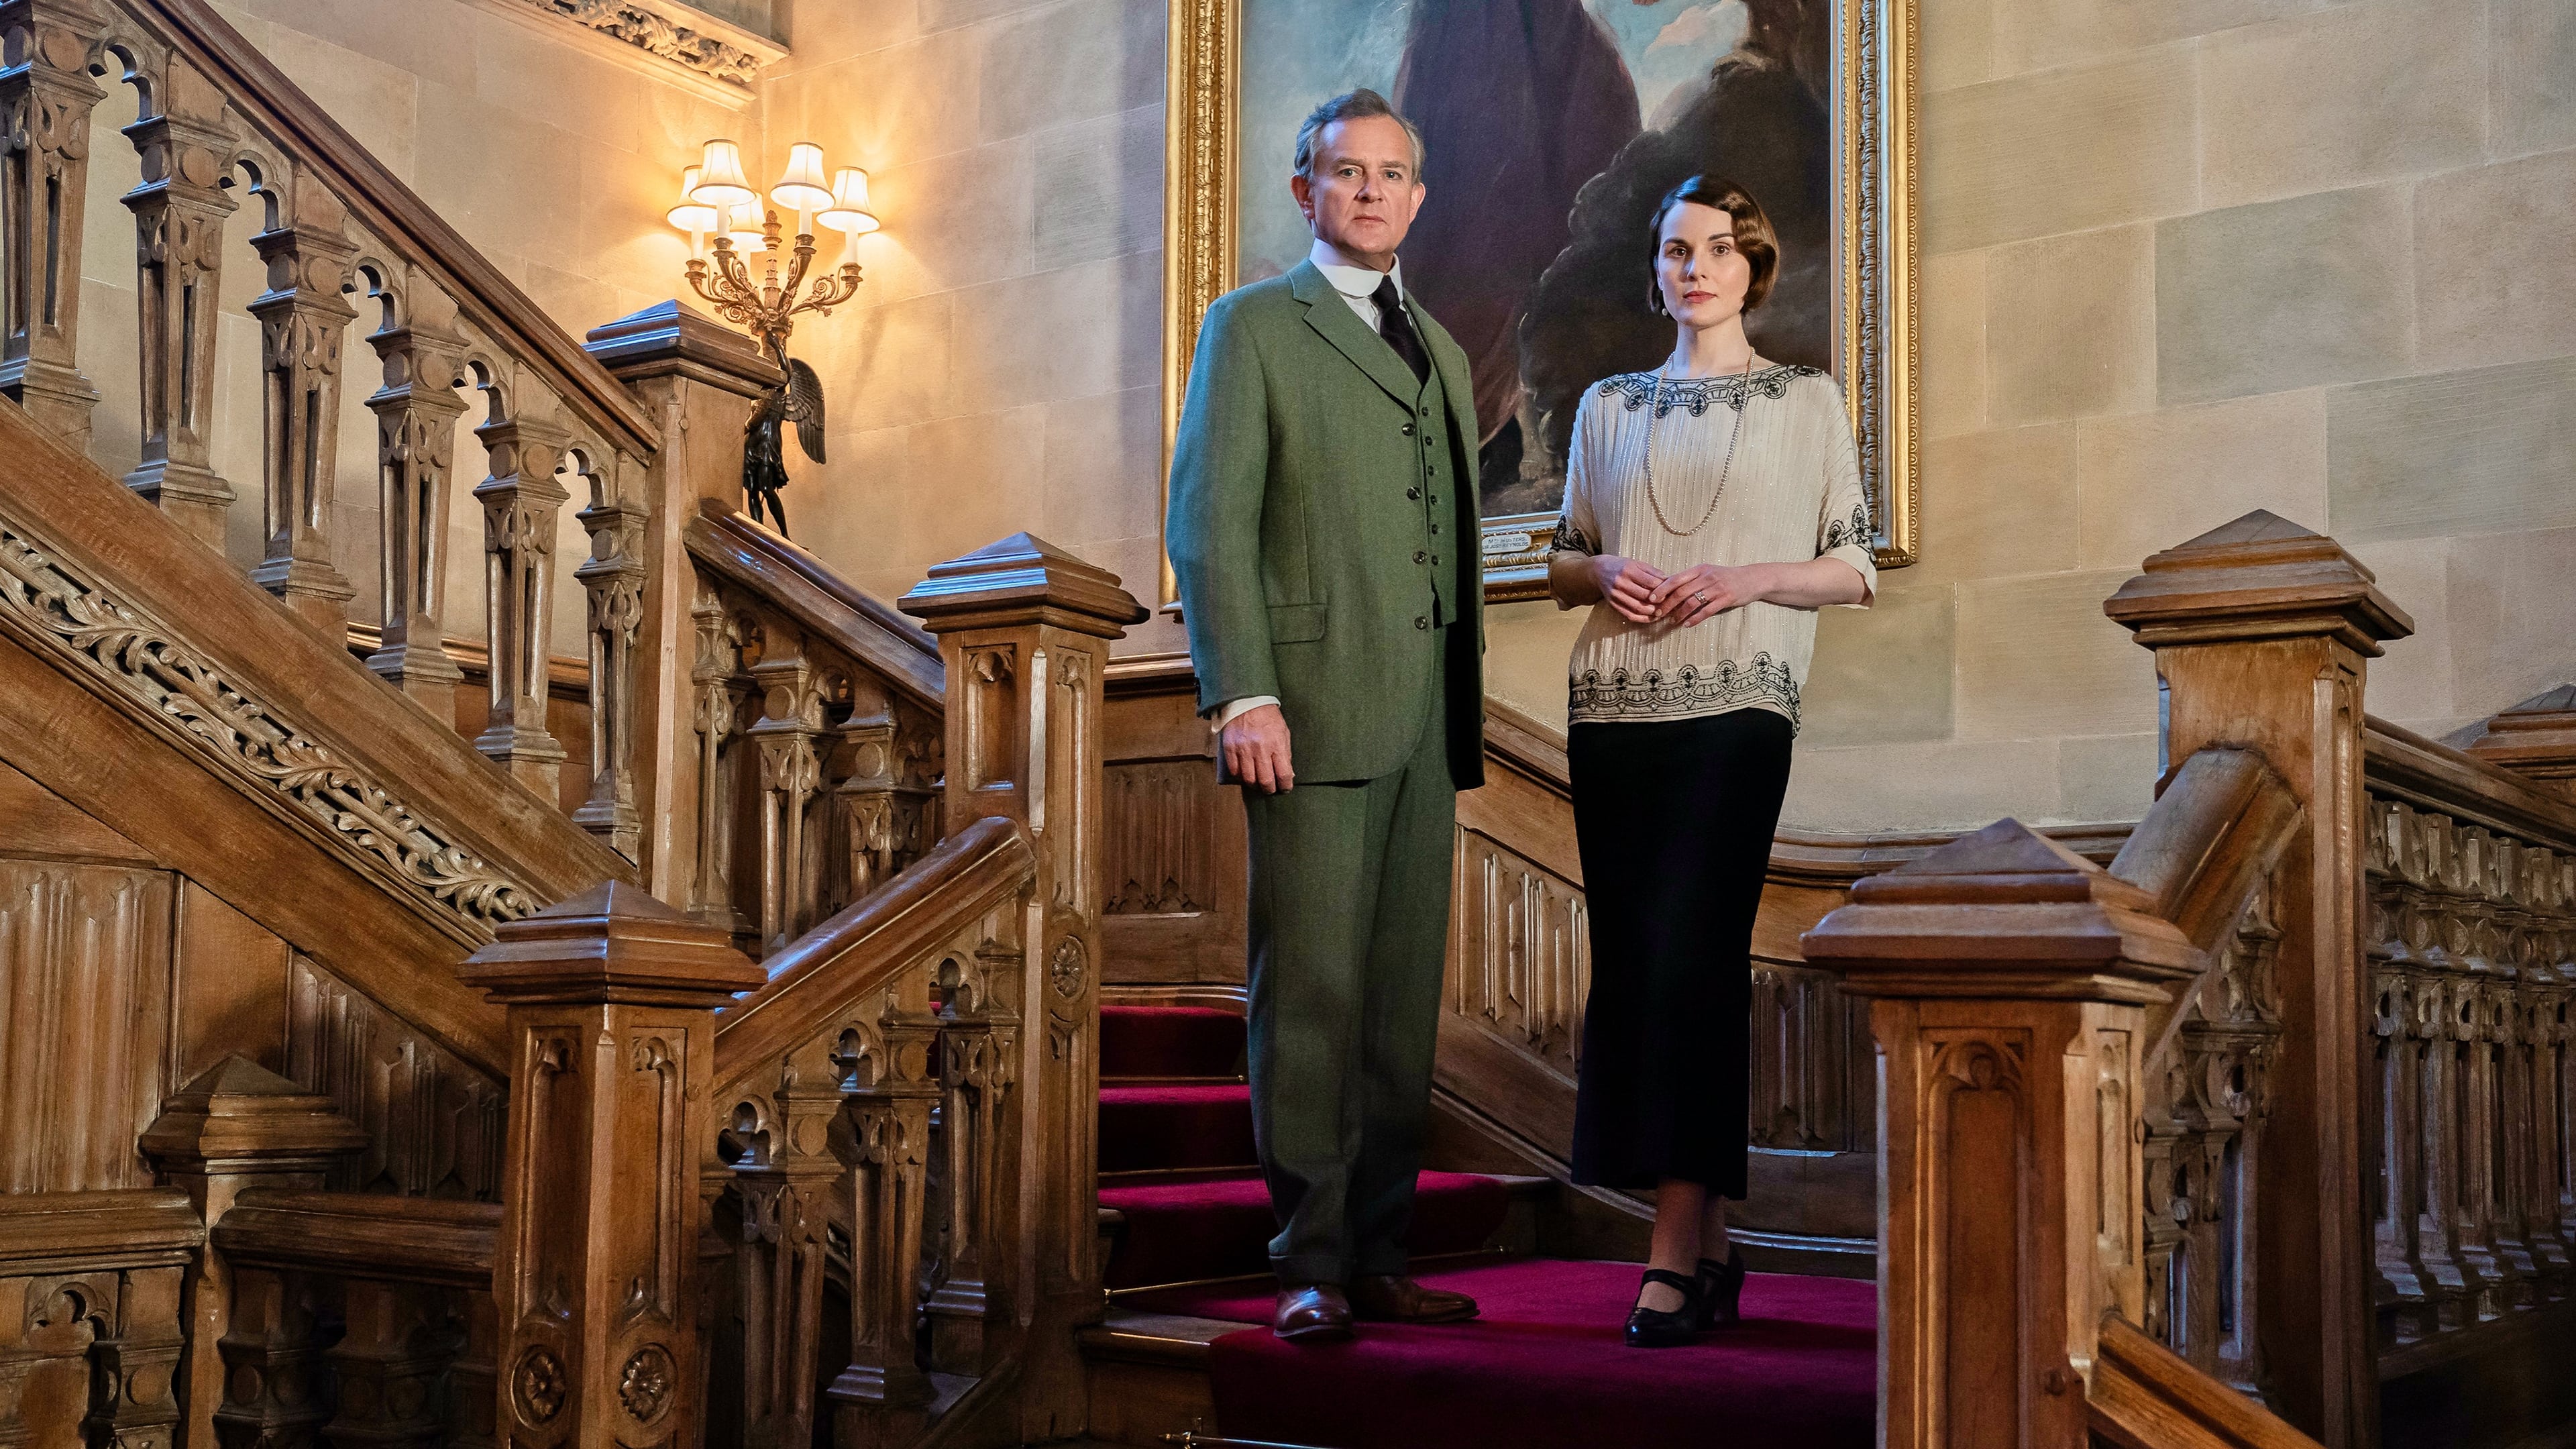 Downton Abbey : Une Nouvelle Ère
 film complet streaming vf
